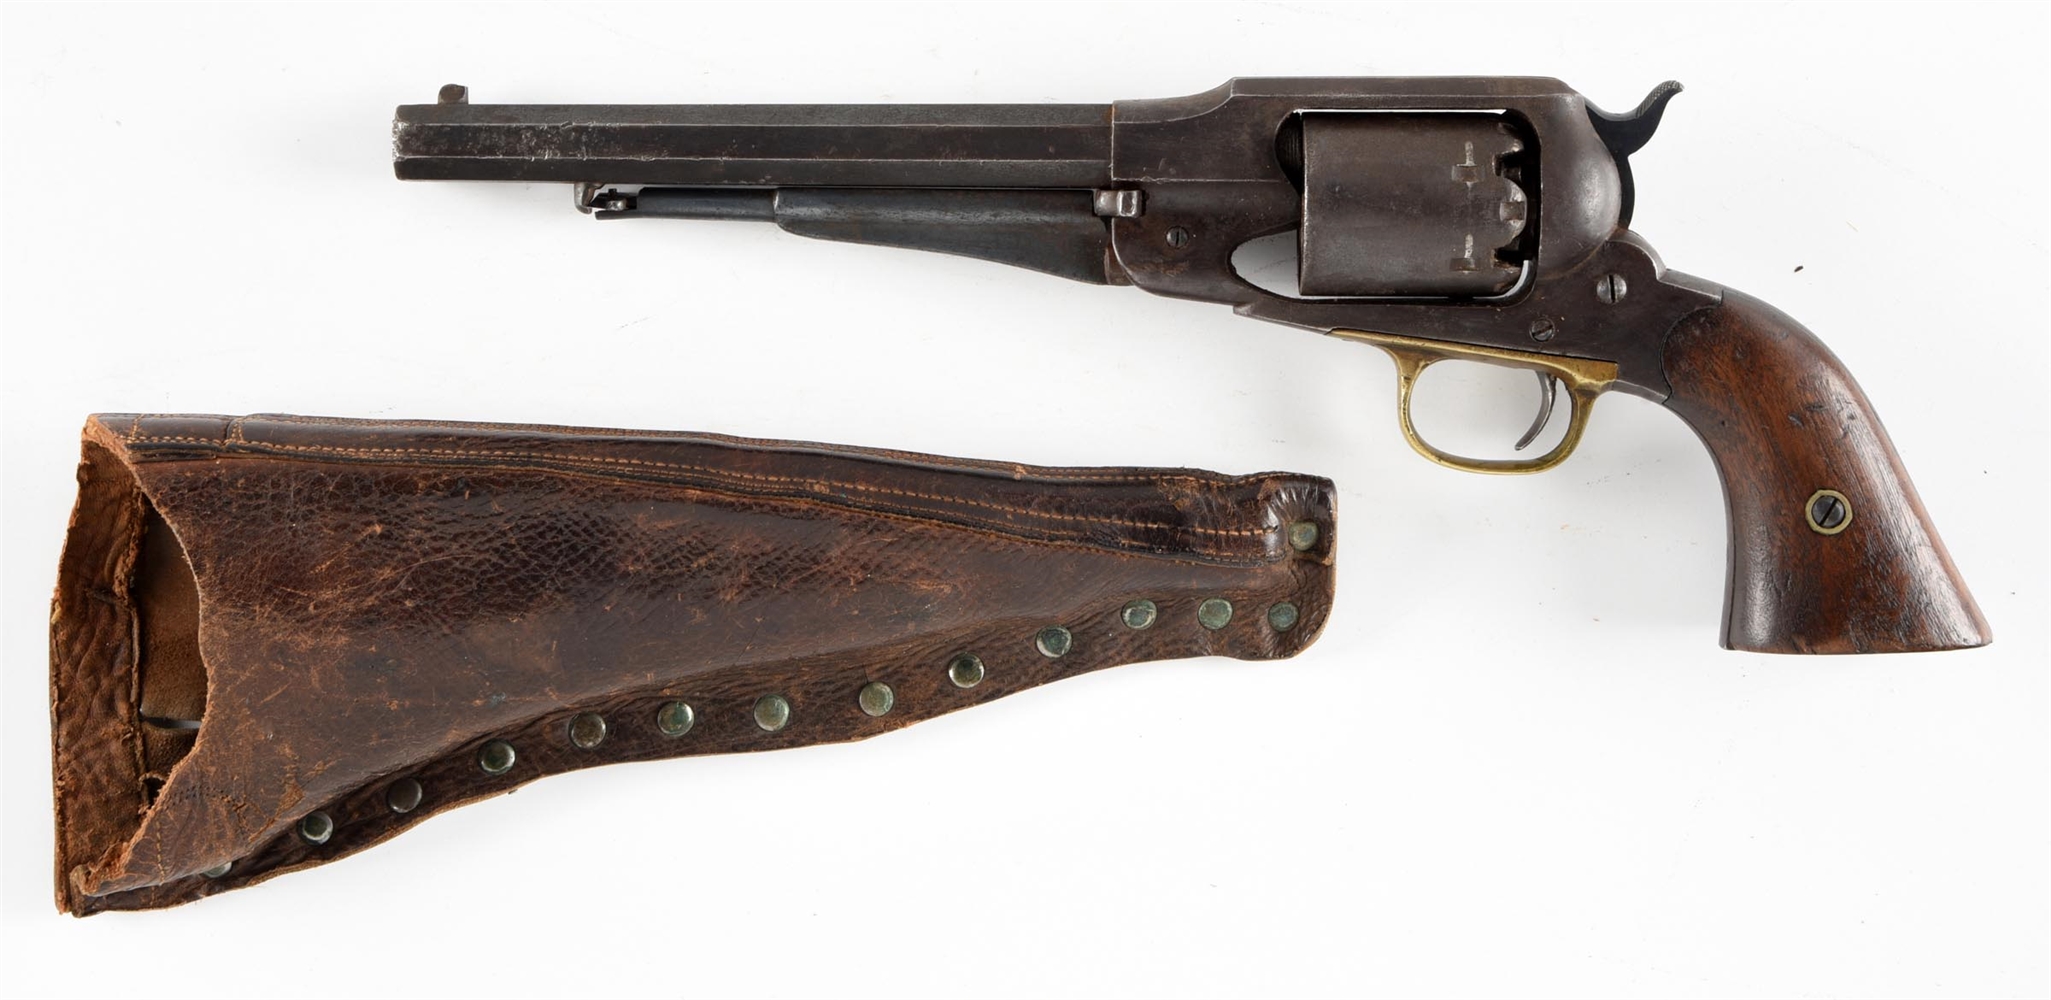 (A) REMINGTON 1858 PERCUSSION REVOLVER WITH HOLSTER.